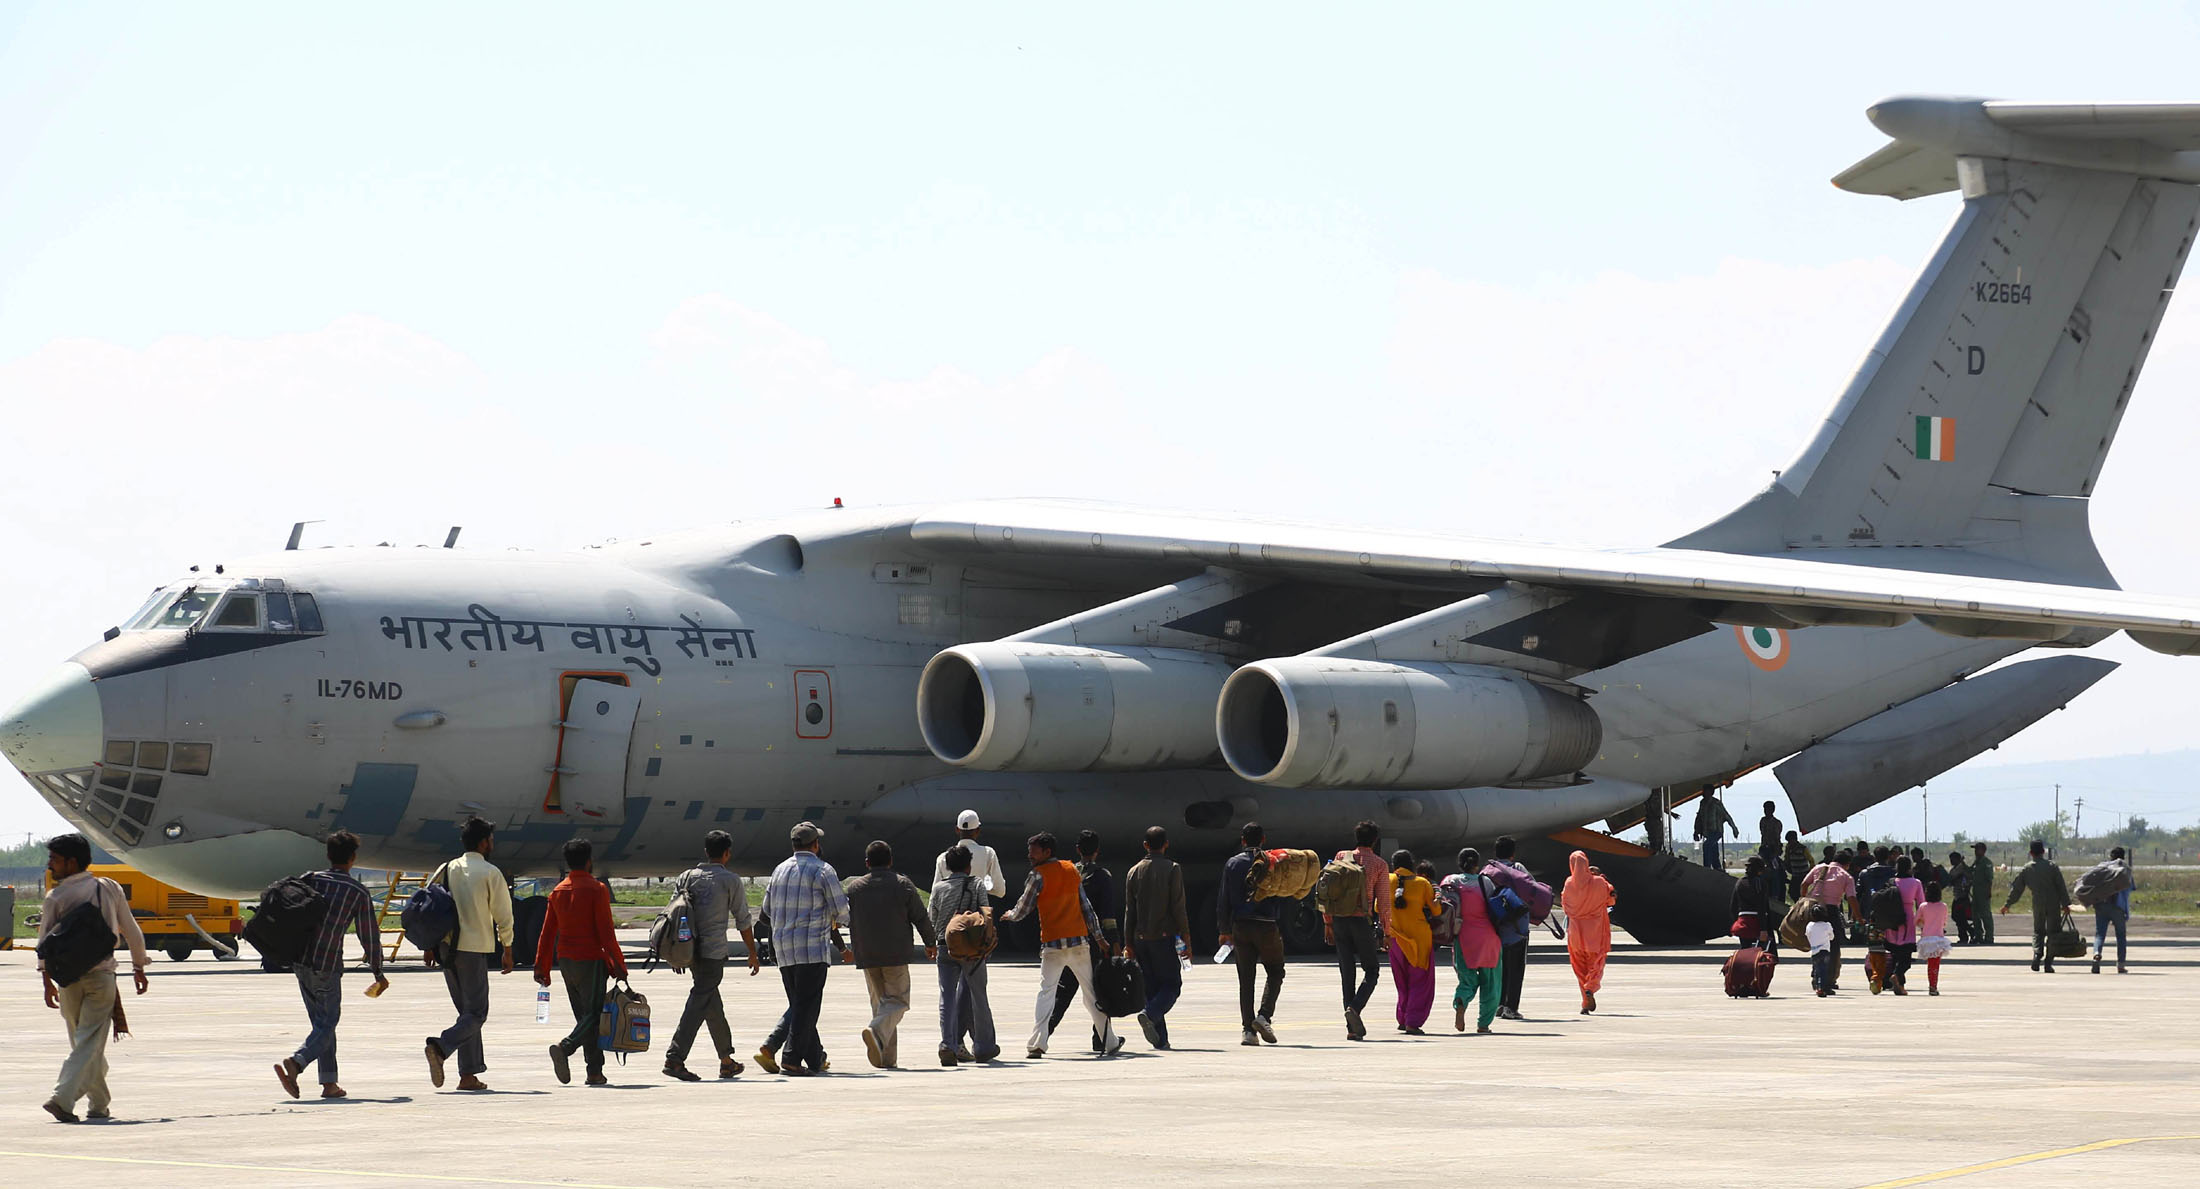 A long queue of the rescued people from flood ravaged Jammu & Kashmir boarding the IAF’s IL-76 transport aircraft